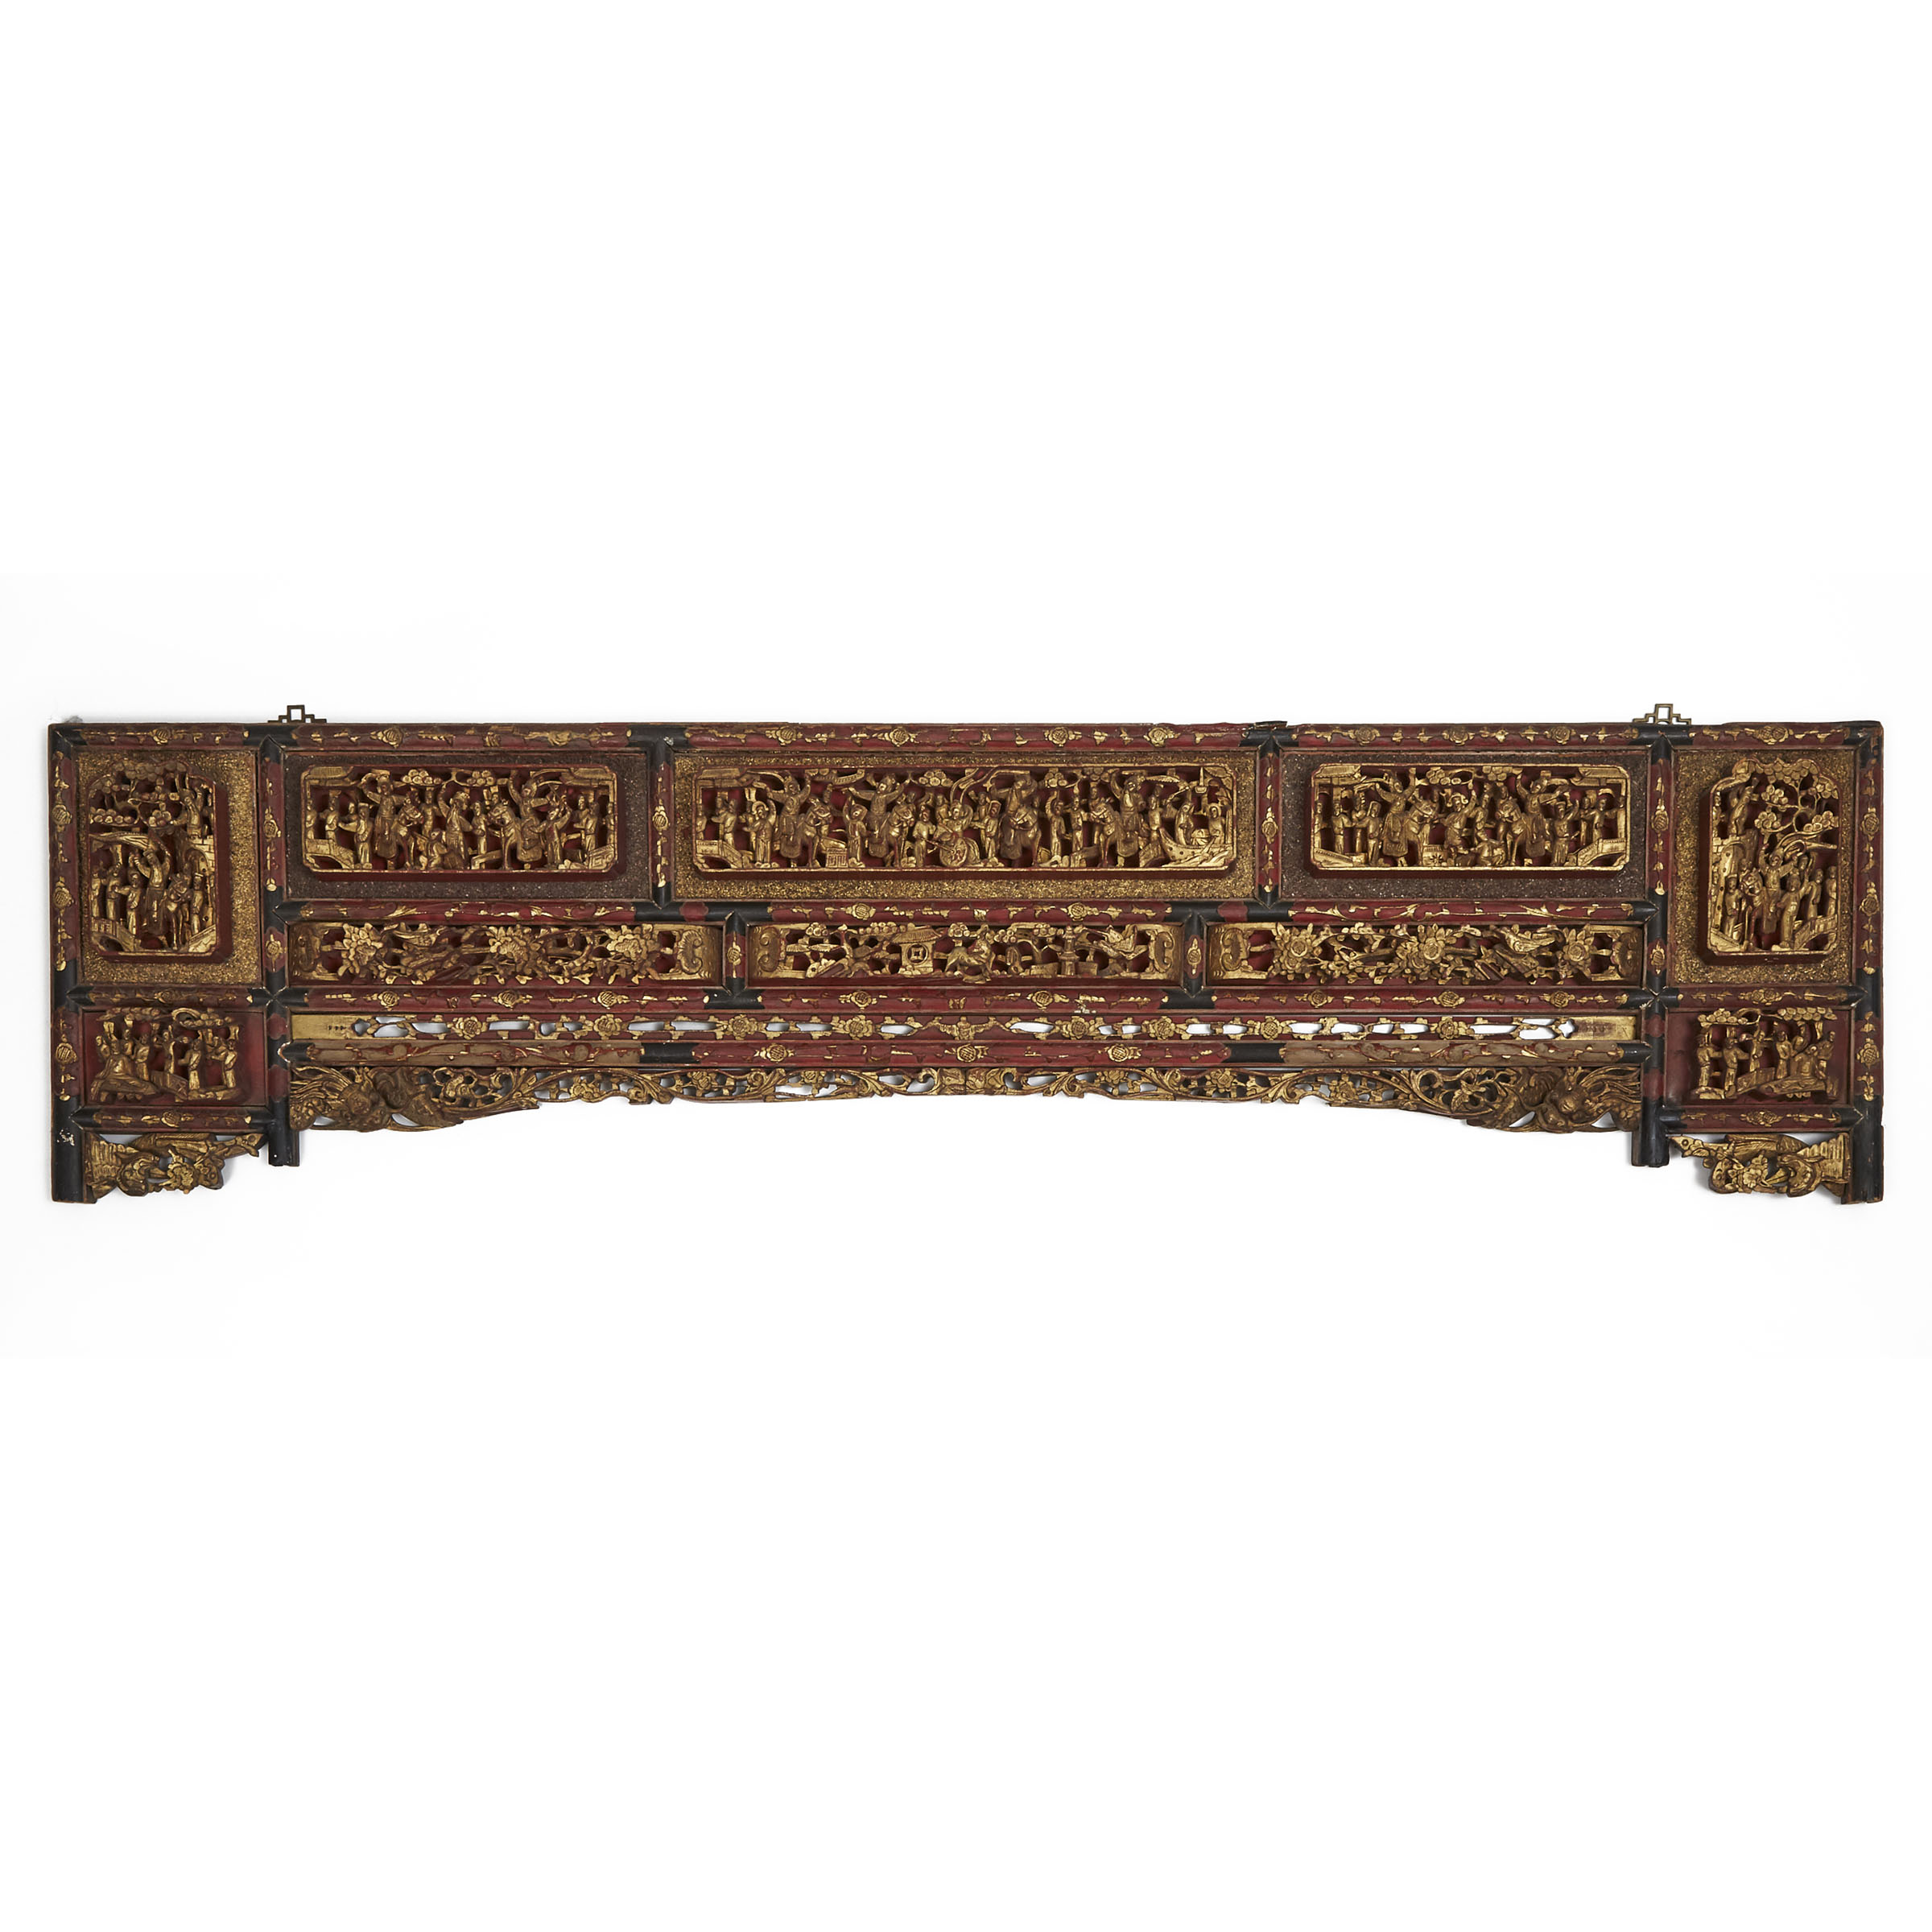 A Large Gilt Lacquer Headboard Carved with Figural Landscapes, 19th Century